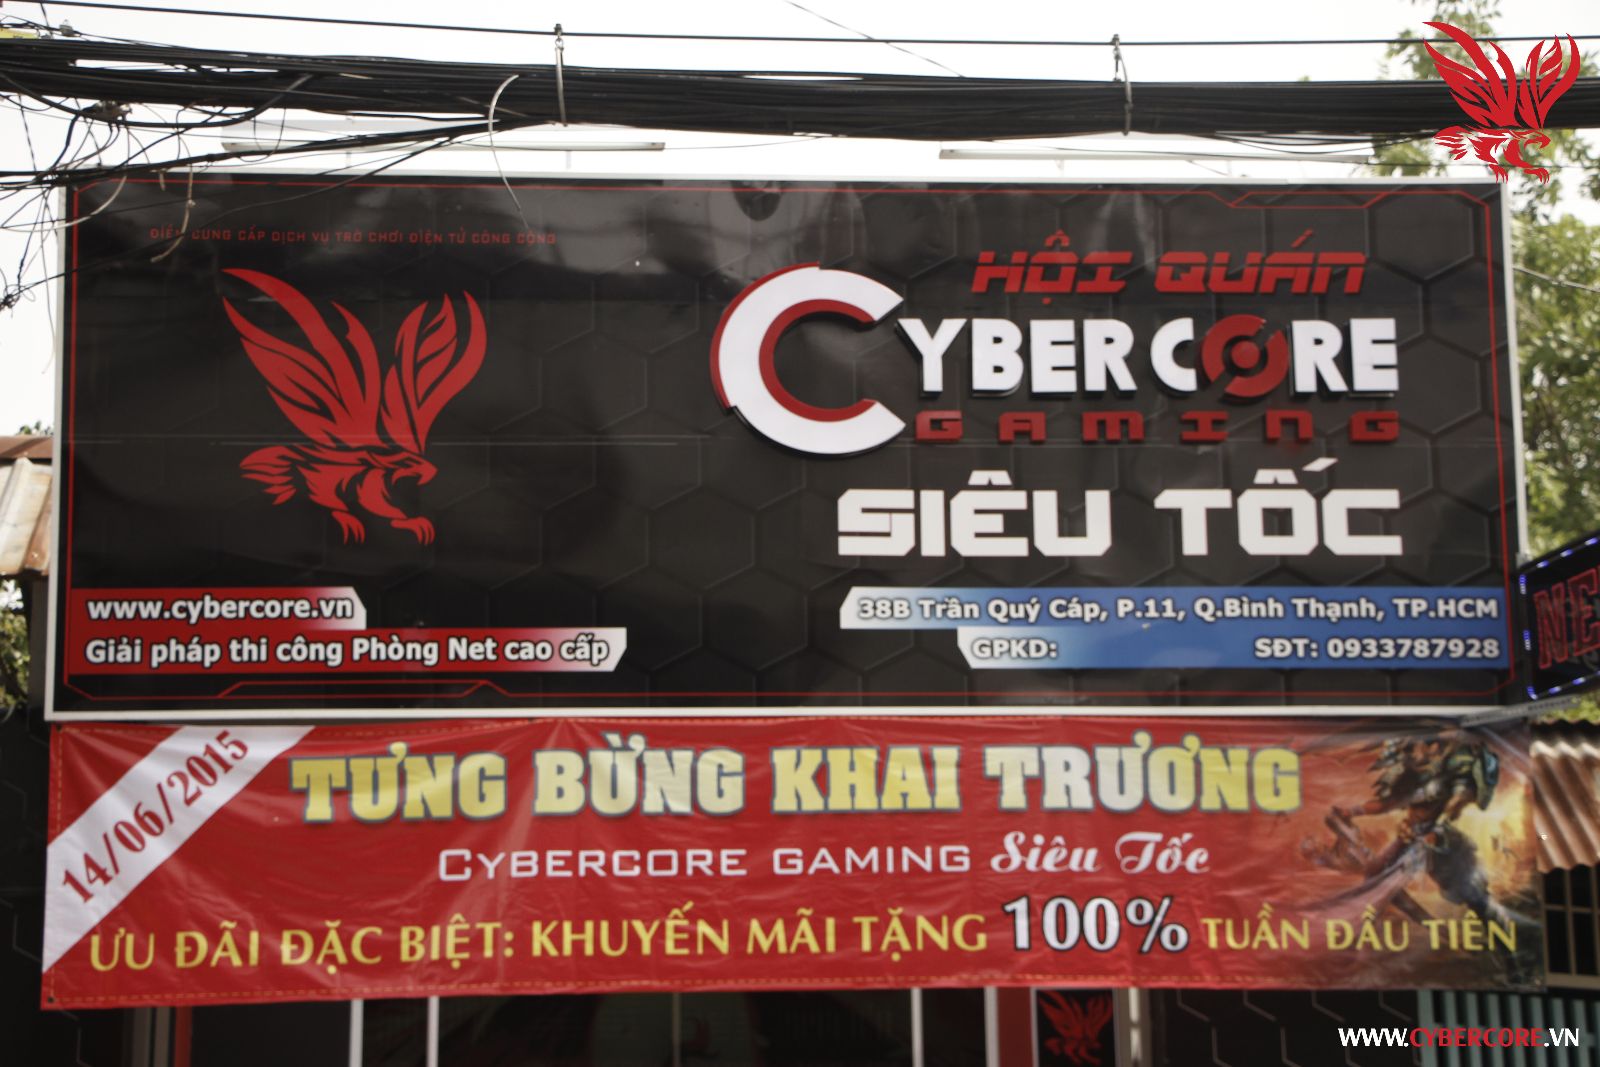 https://img-cdn.2game.vn/pictures/images/2015/6/23/cybercore_gaming_sieu_toc_1.JPG